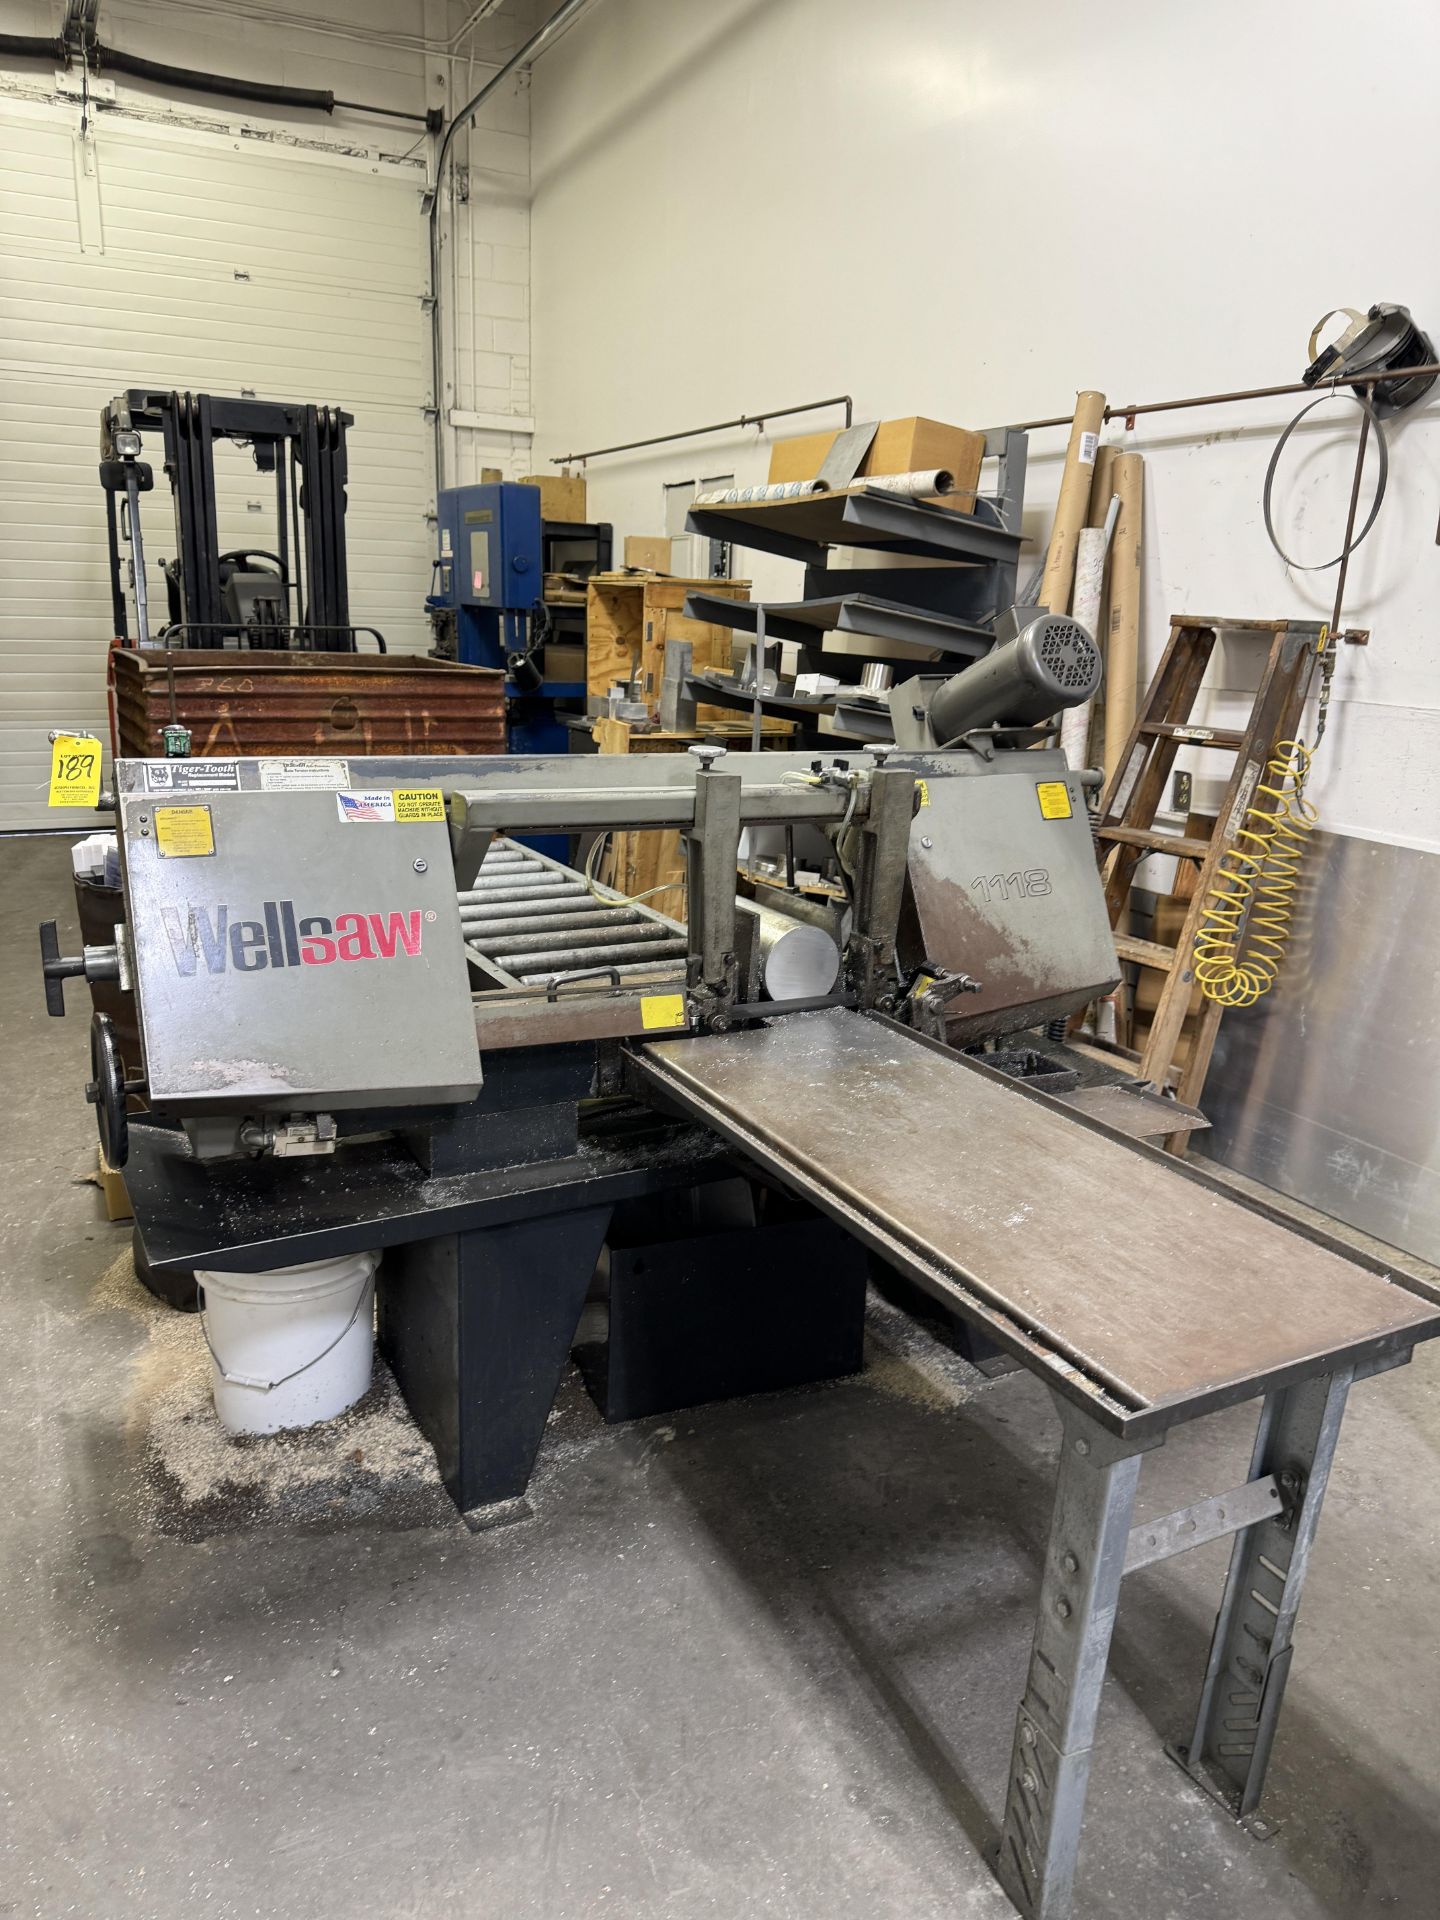 (1) Wellsaw 1118 Horizontal Band Saw, 18", 3 HP Infeed Table, Outfeed Conveyor (Infeed Table is